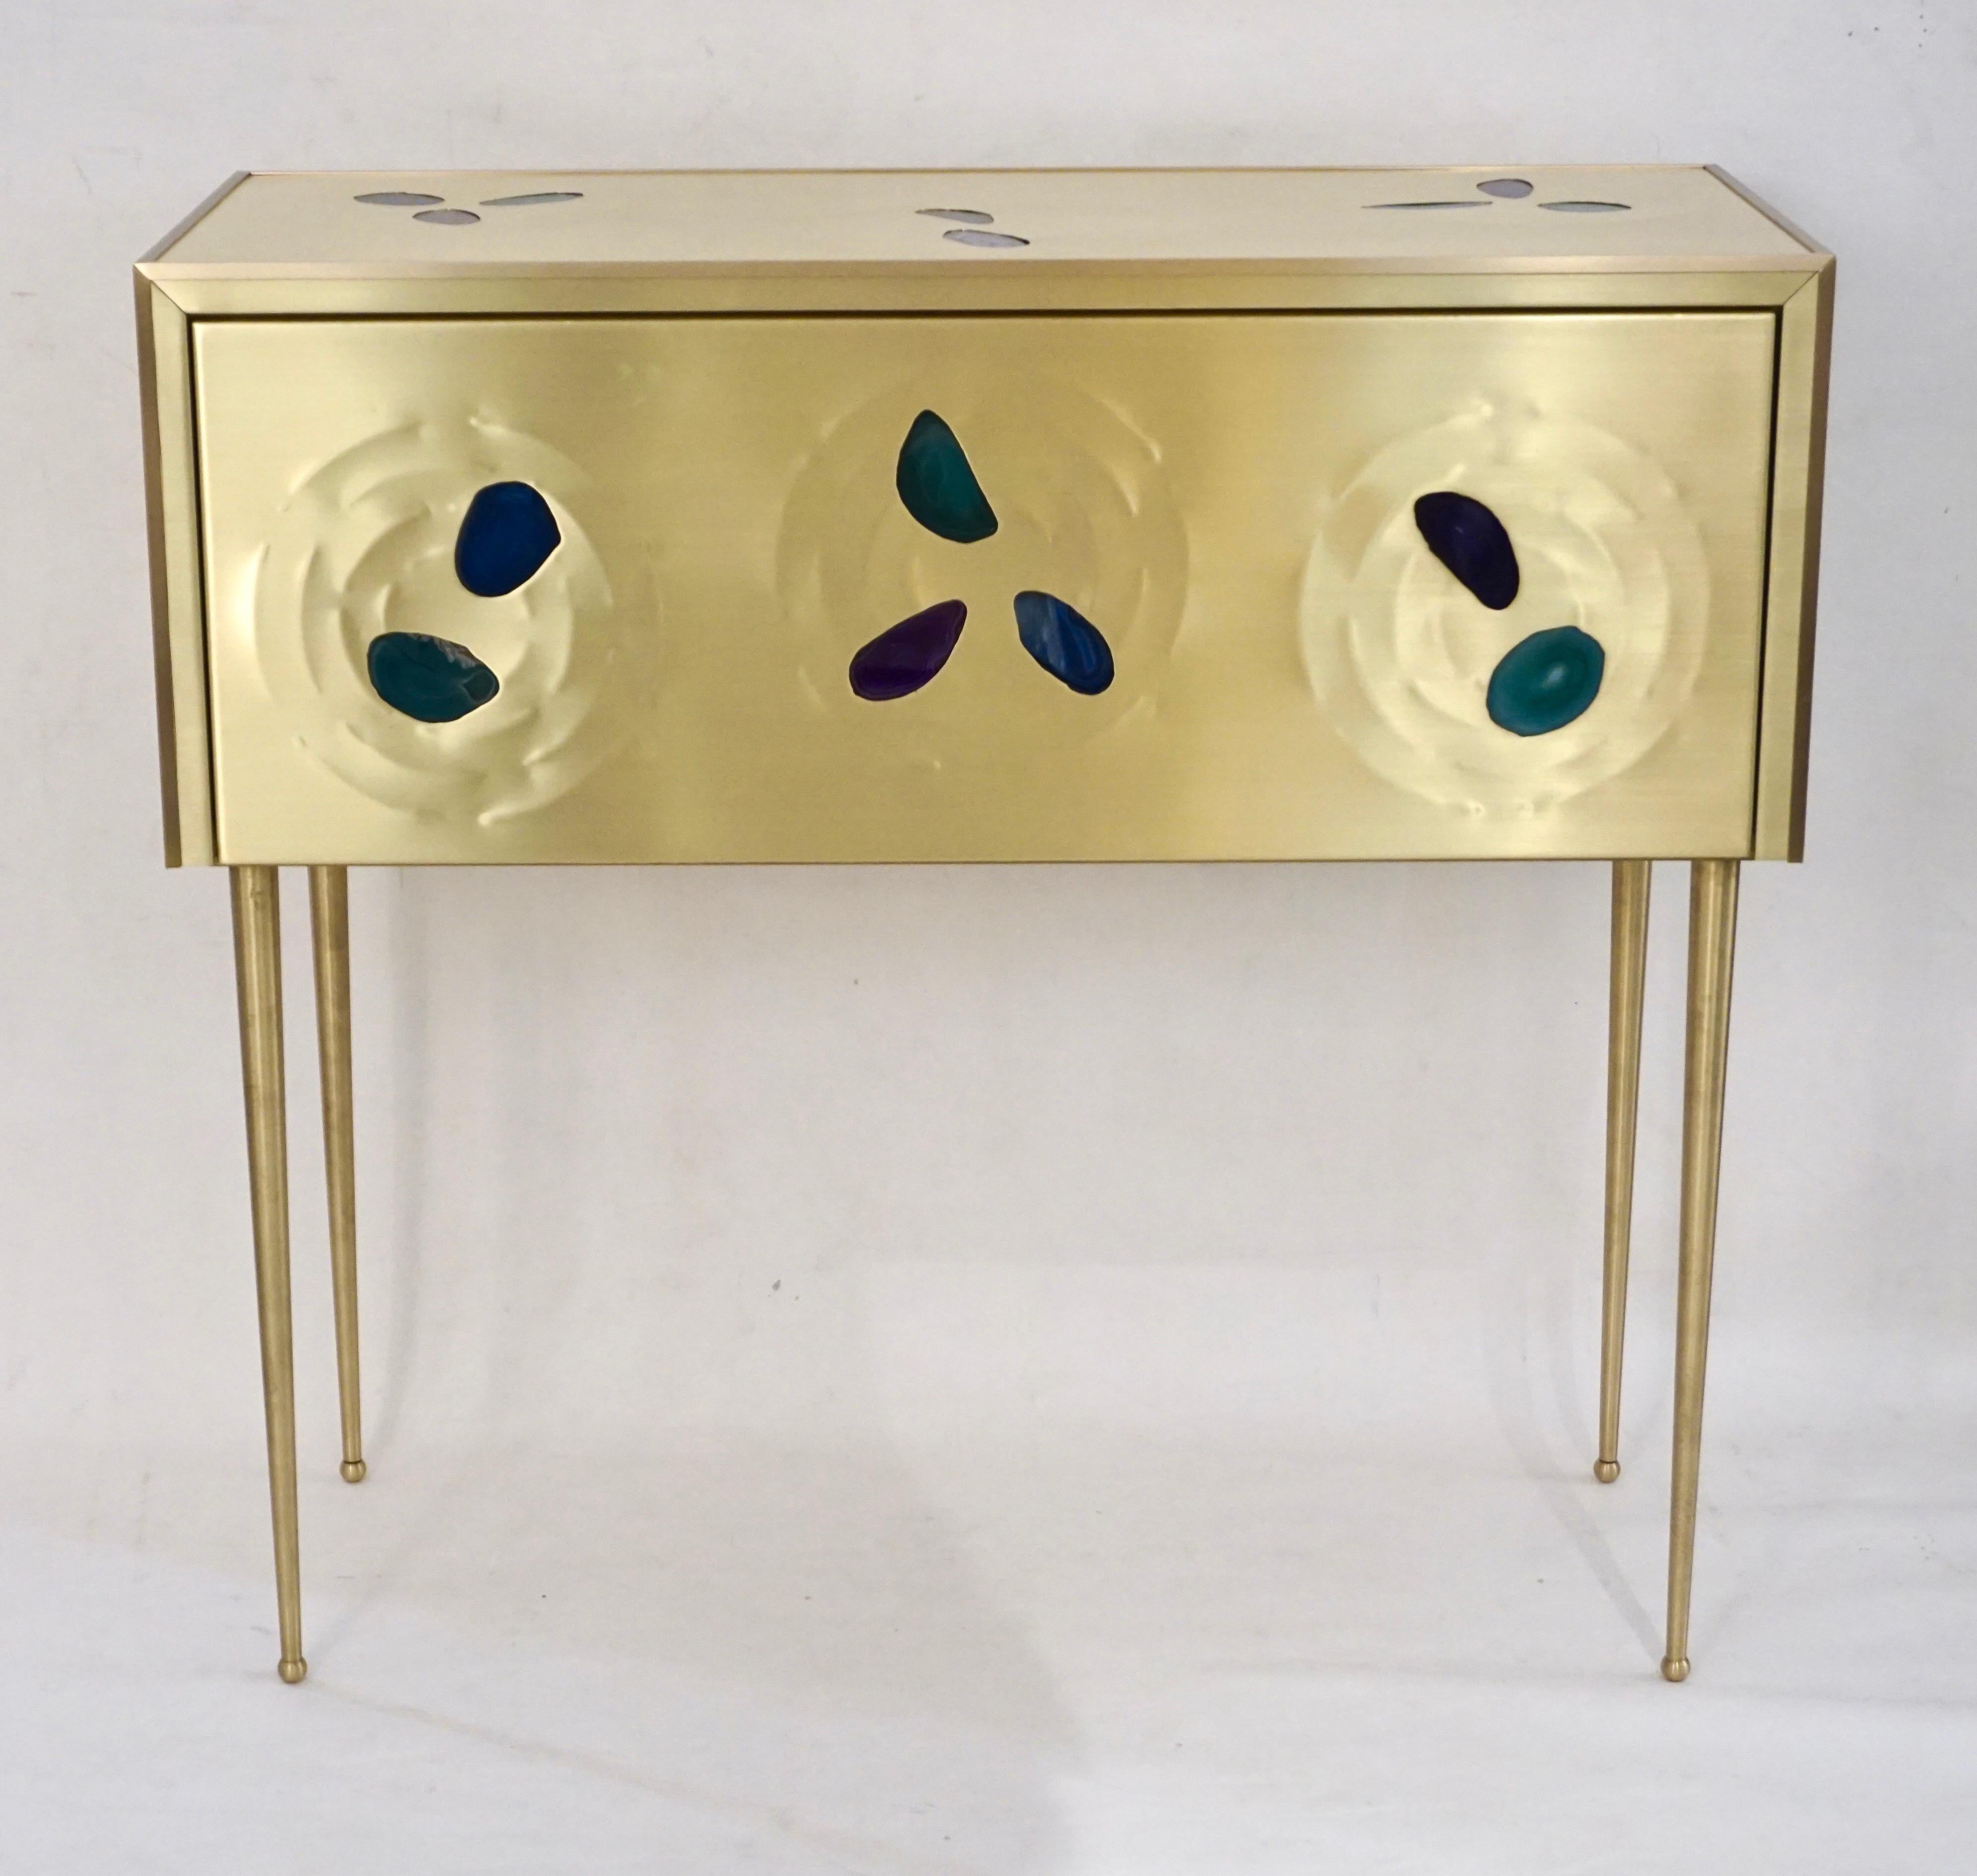 Contemporary modern Italian Fine design console / side table with 1 soft closure drawer, entirely hadn't made and wrapped, the back as well, in gold brass decorated with organic insets of cut agate in purple, blue and green. The stone is set like